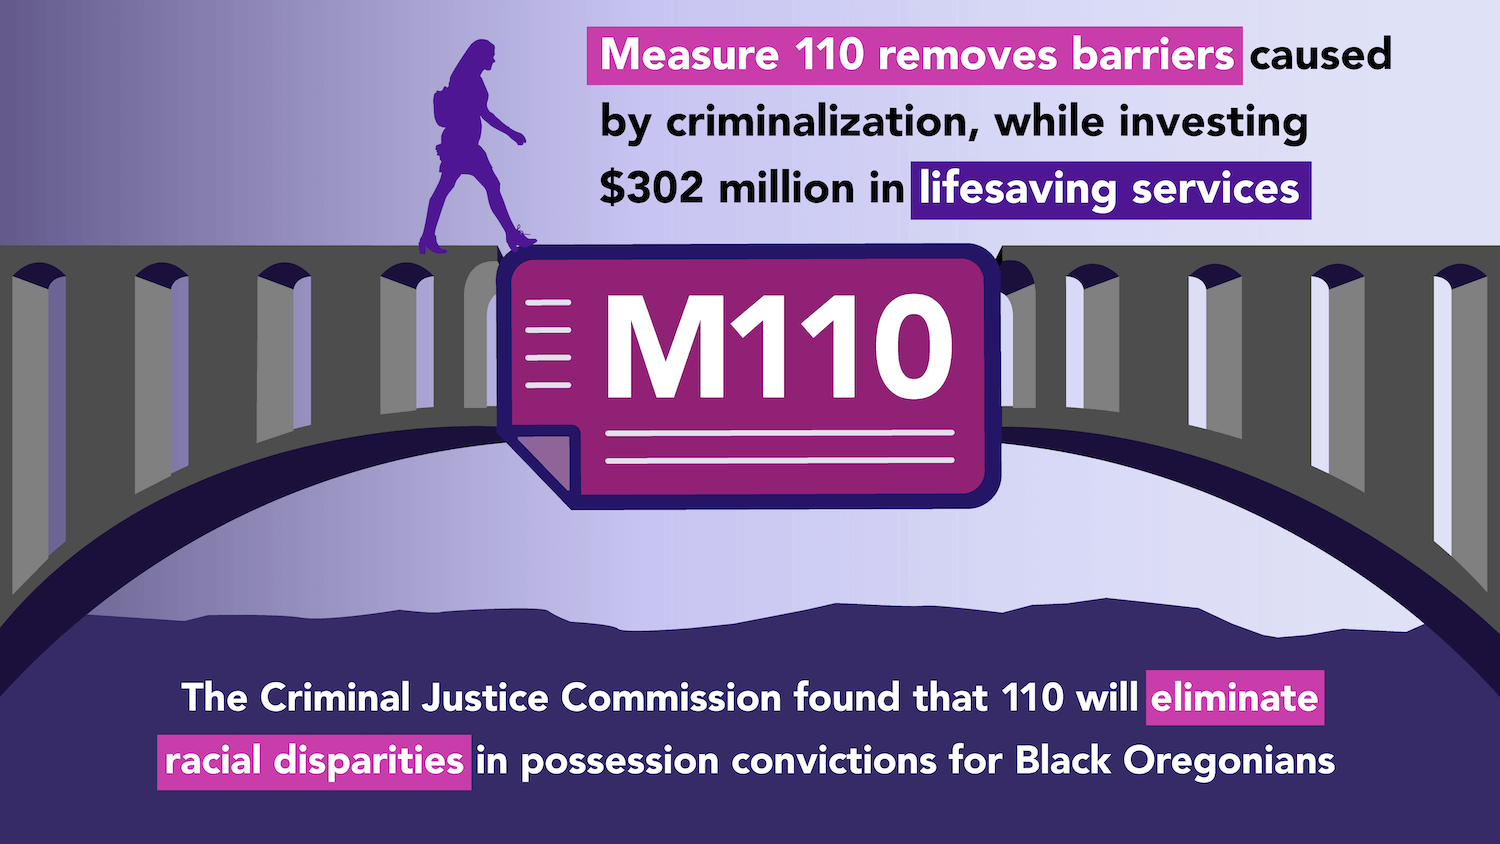 Measure 110 removes barriers while investing $302 million in lifesaving services